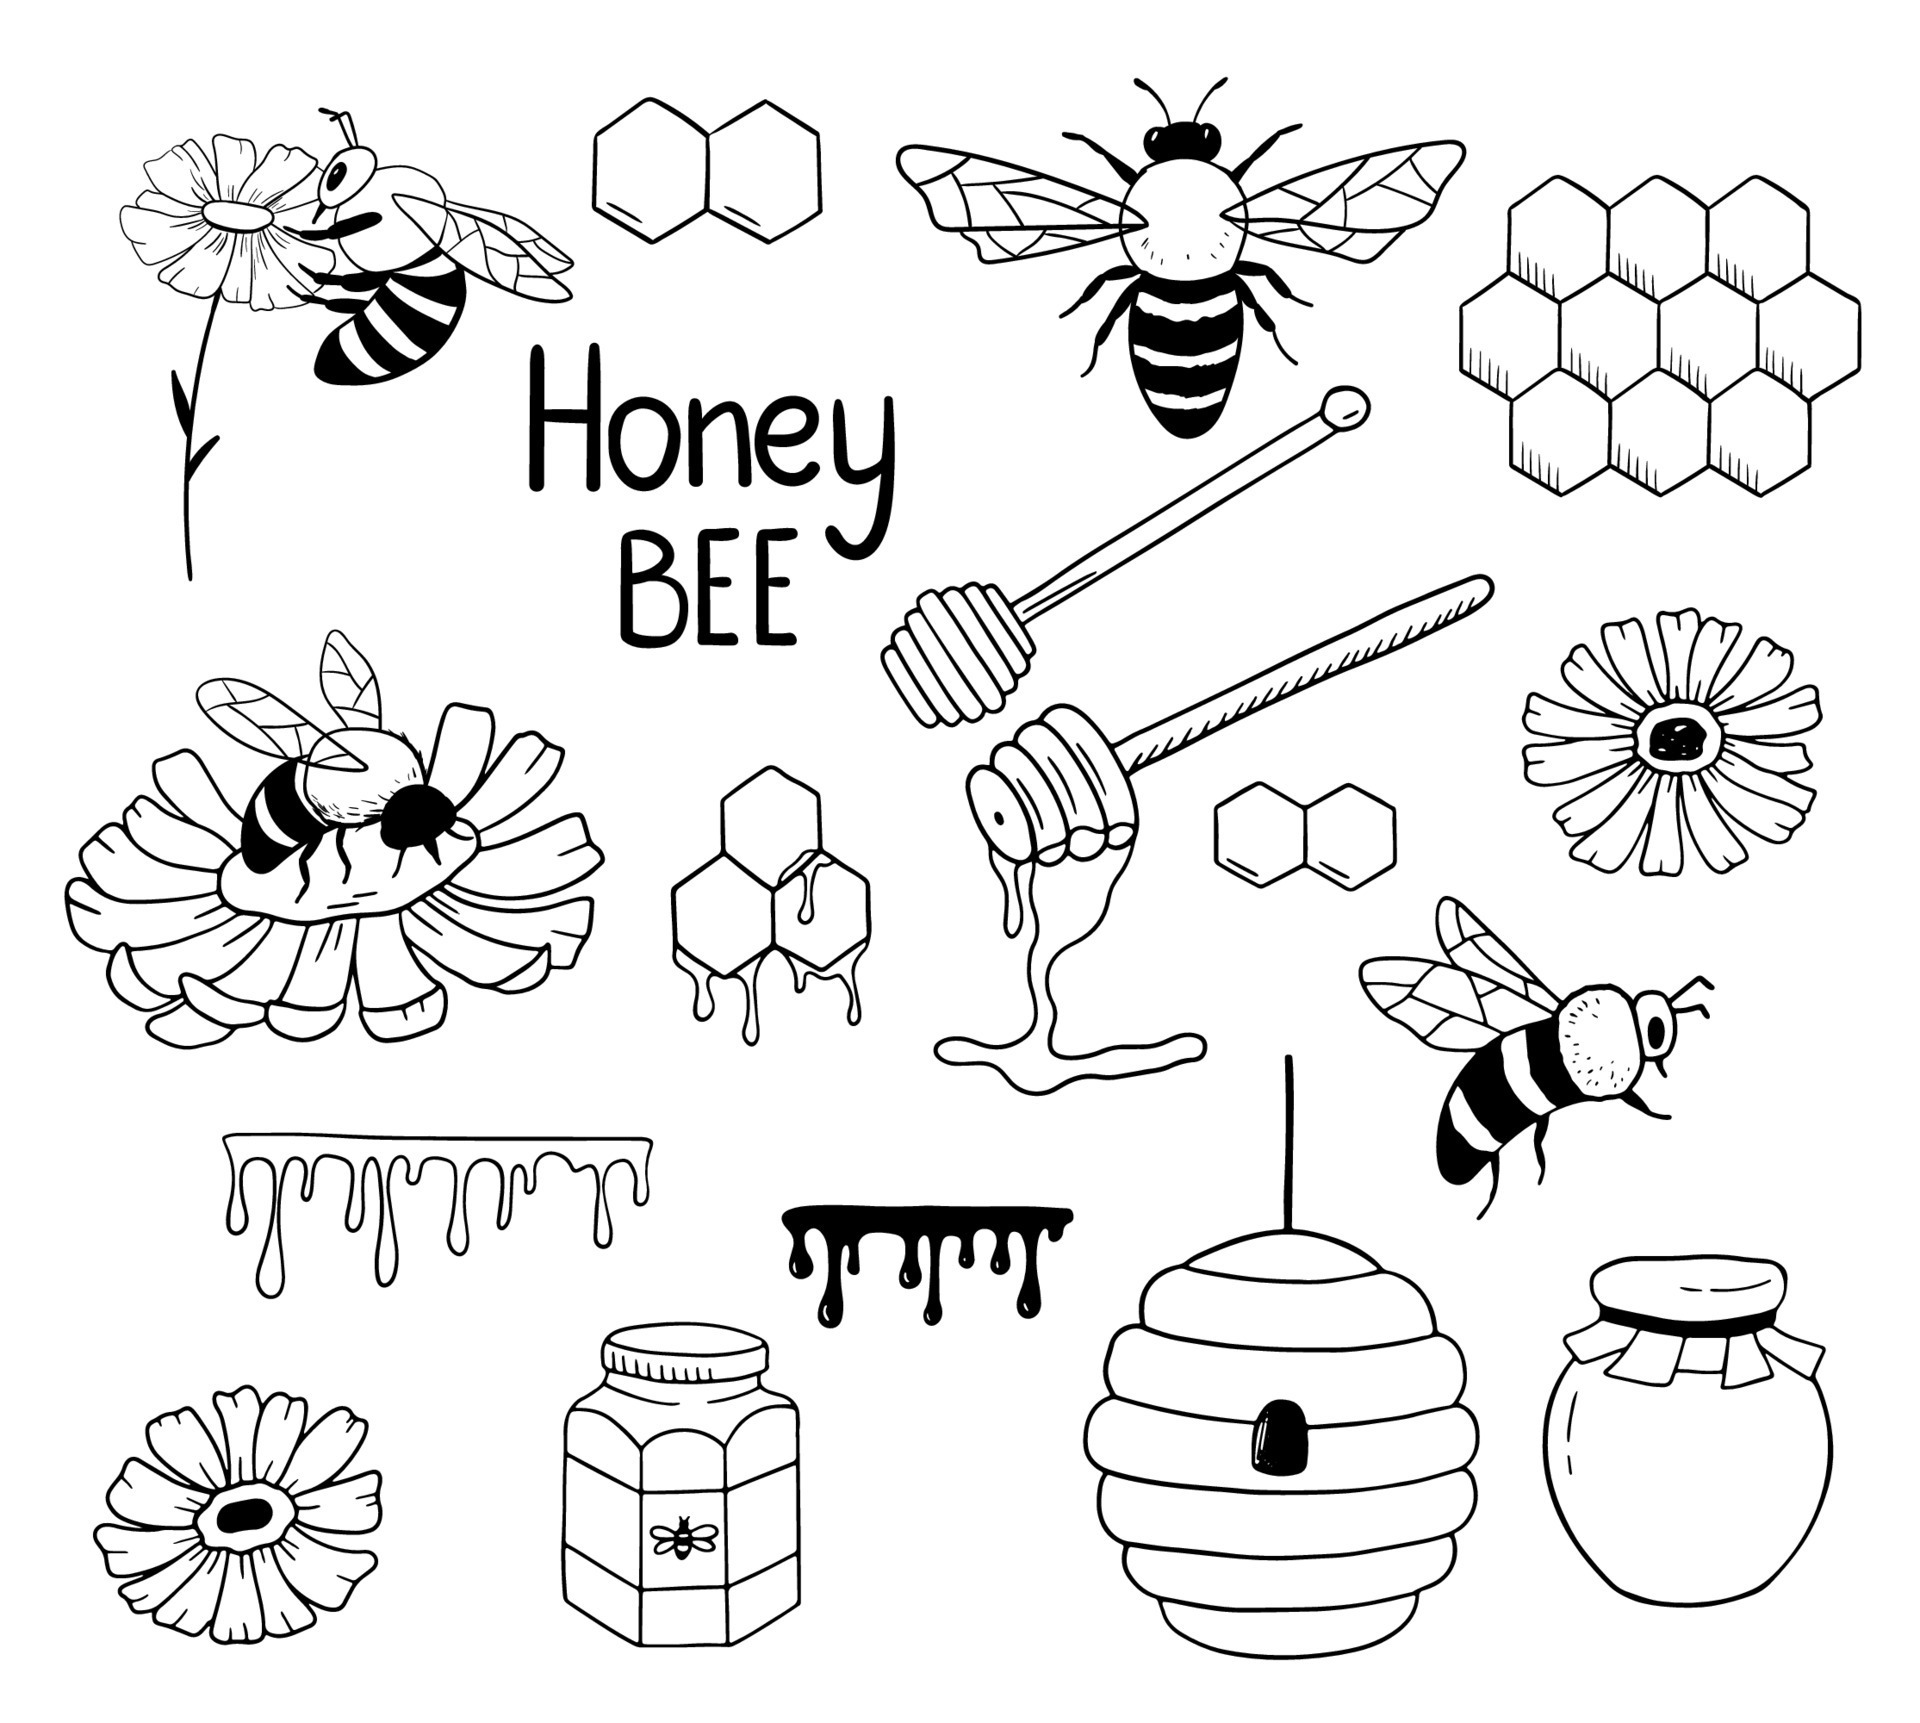 Honey Bee Flying Drawing 2D Animation | Stock Video | Pond5-saigonsouth.com.vn